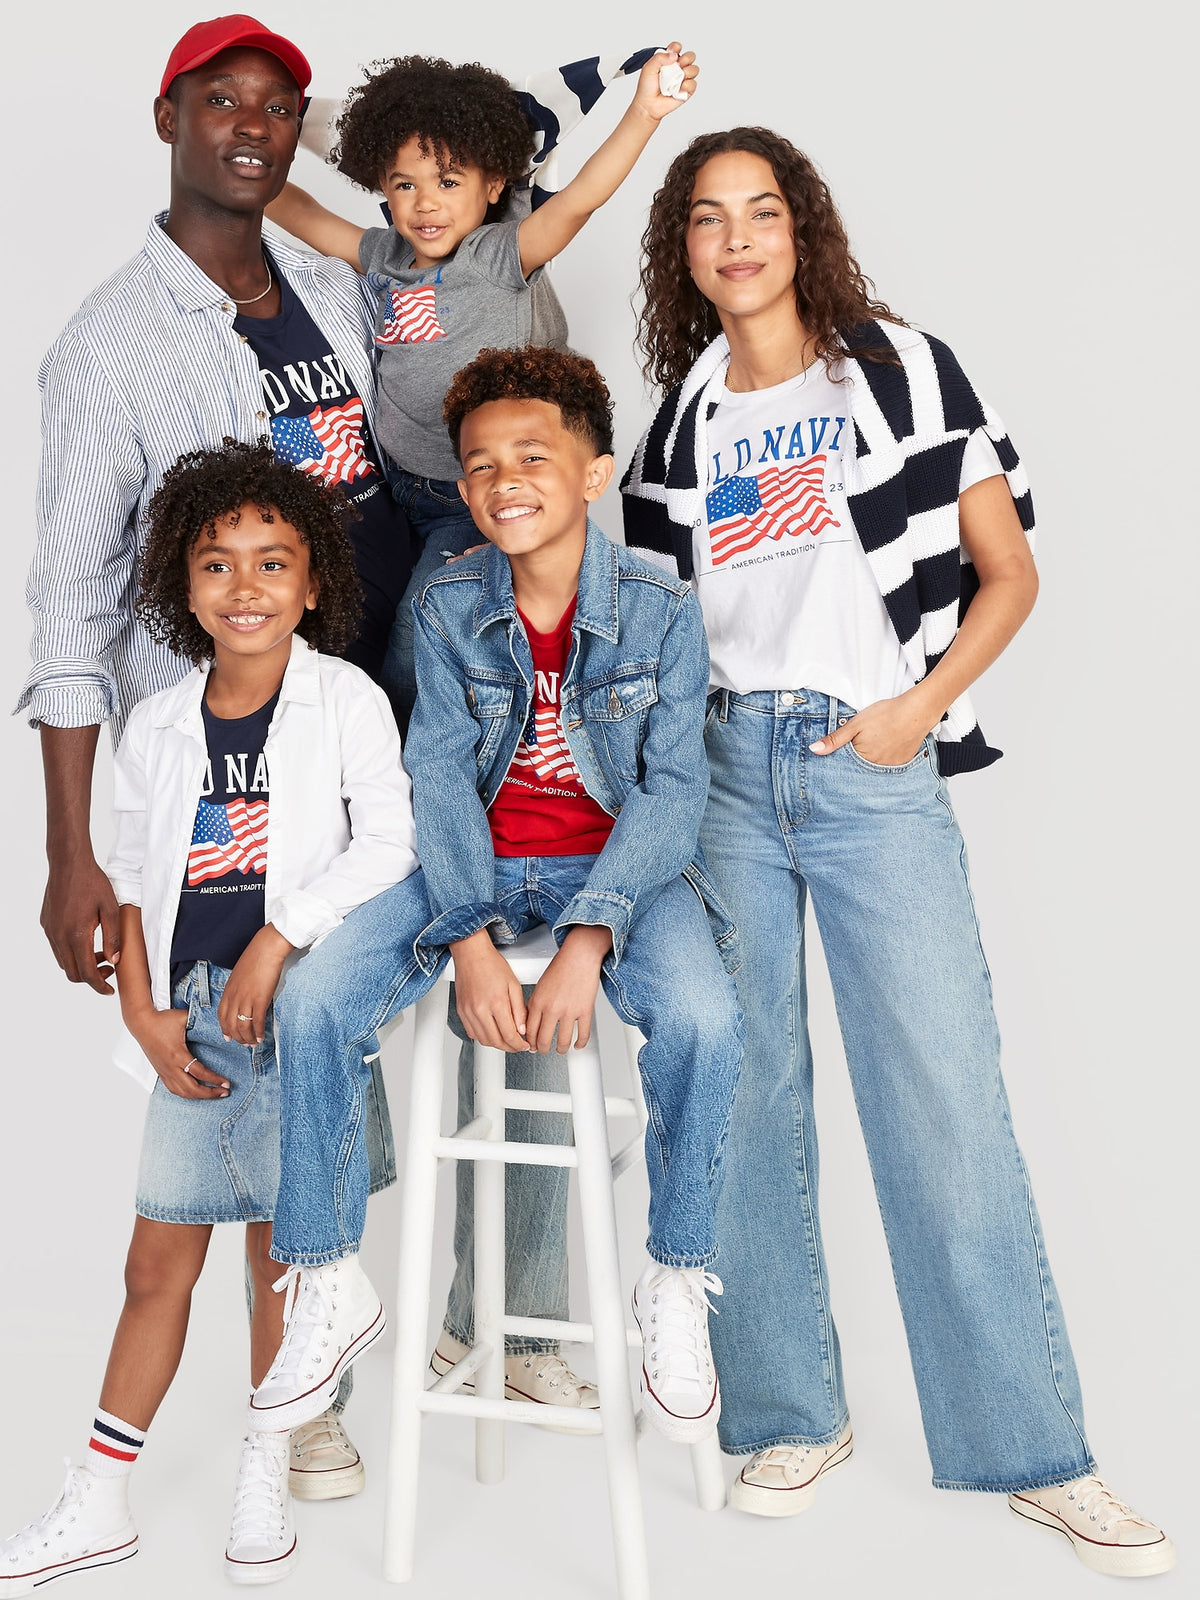 Red Old Navy Flag (Match the Fam)